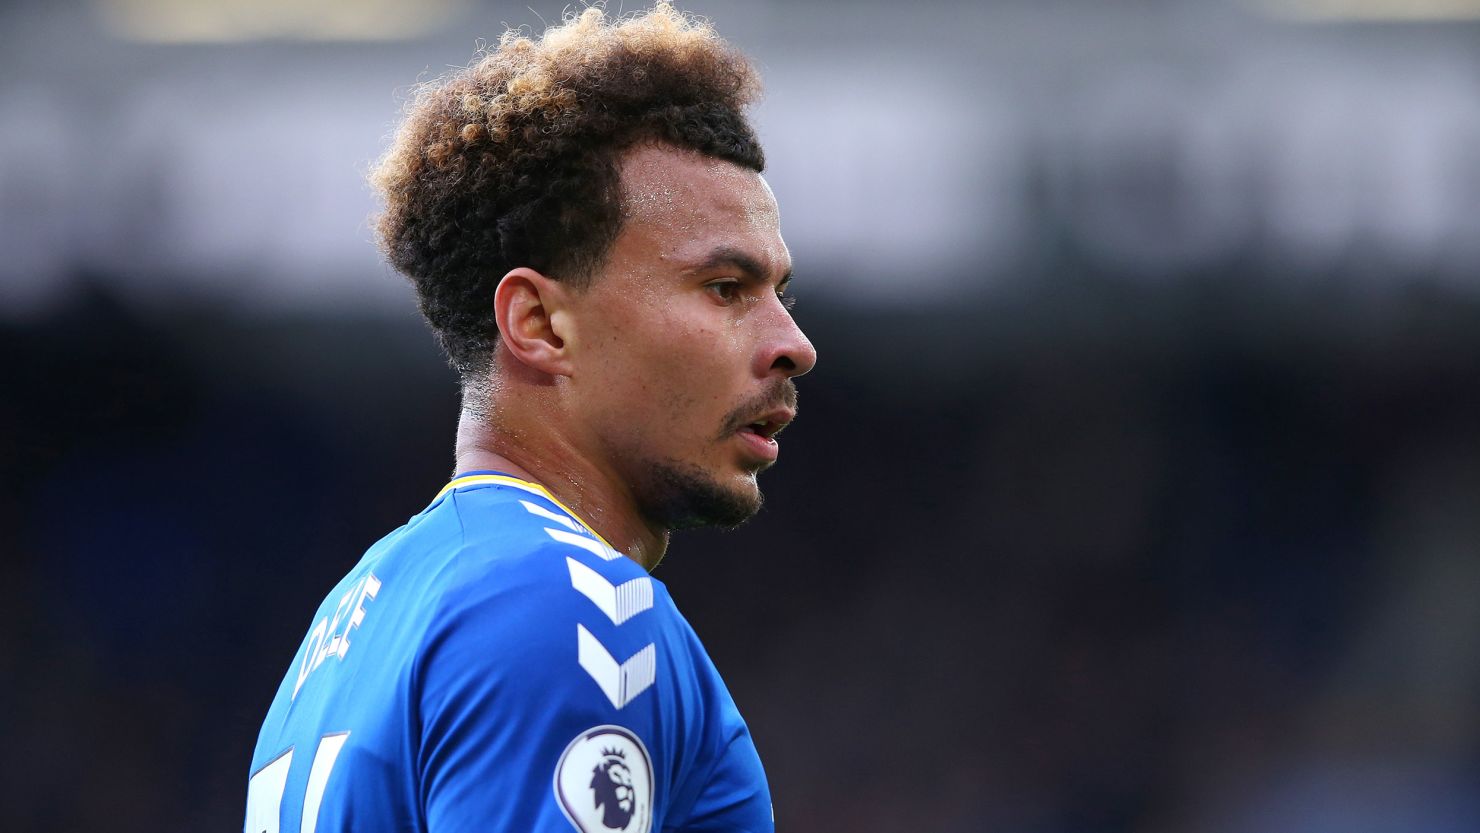 LIVERPOOL, ENGLAND - MARCH 13:  Dele Alli of Everton looks on during the Premier League match between Everton and Wolverhampton Wanderers at Goodison Park on March 13, 2022 in Liverpool, England. (Photo by Alex Livesey/Getty Images)